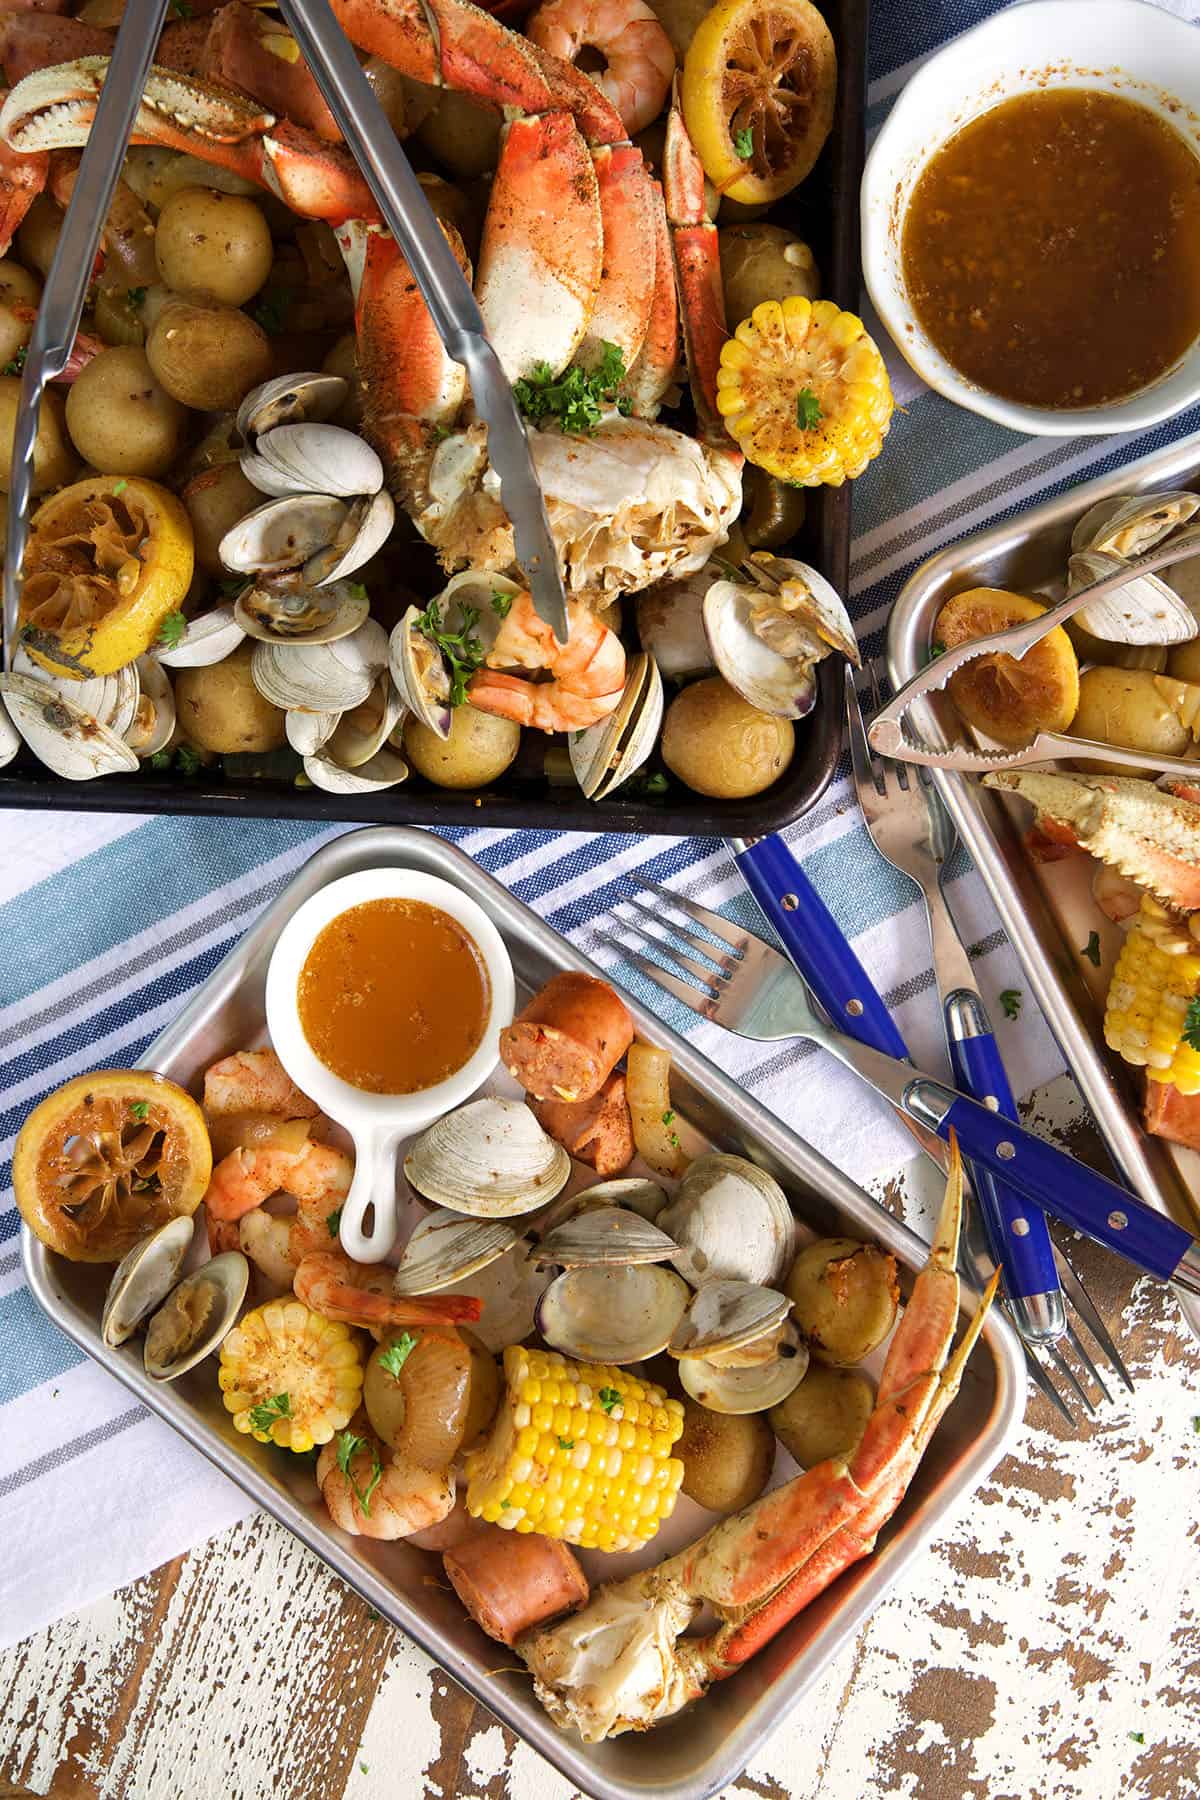 A small rectangular plate is presented with a portion of the seafood boil next to a larger, fuller platter. 